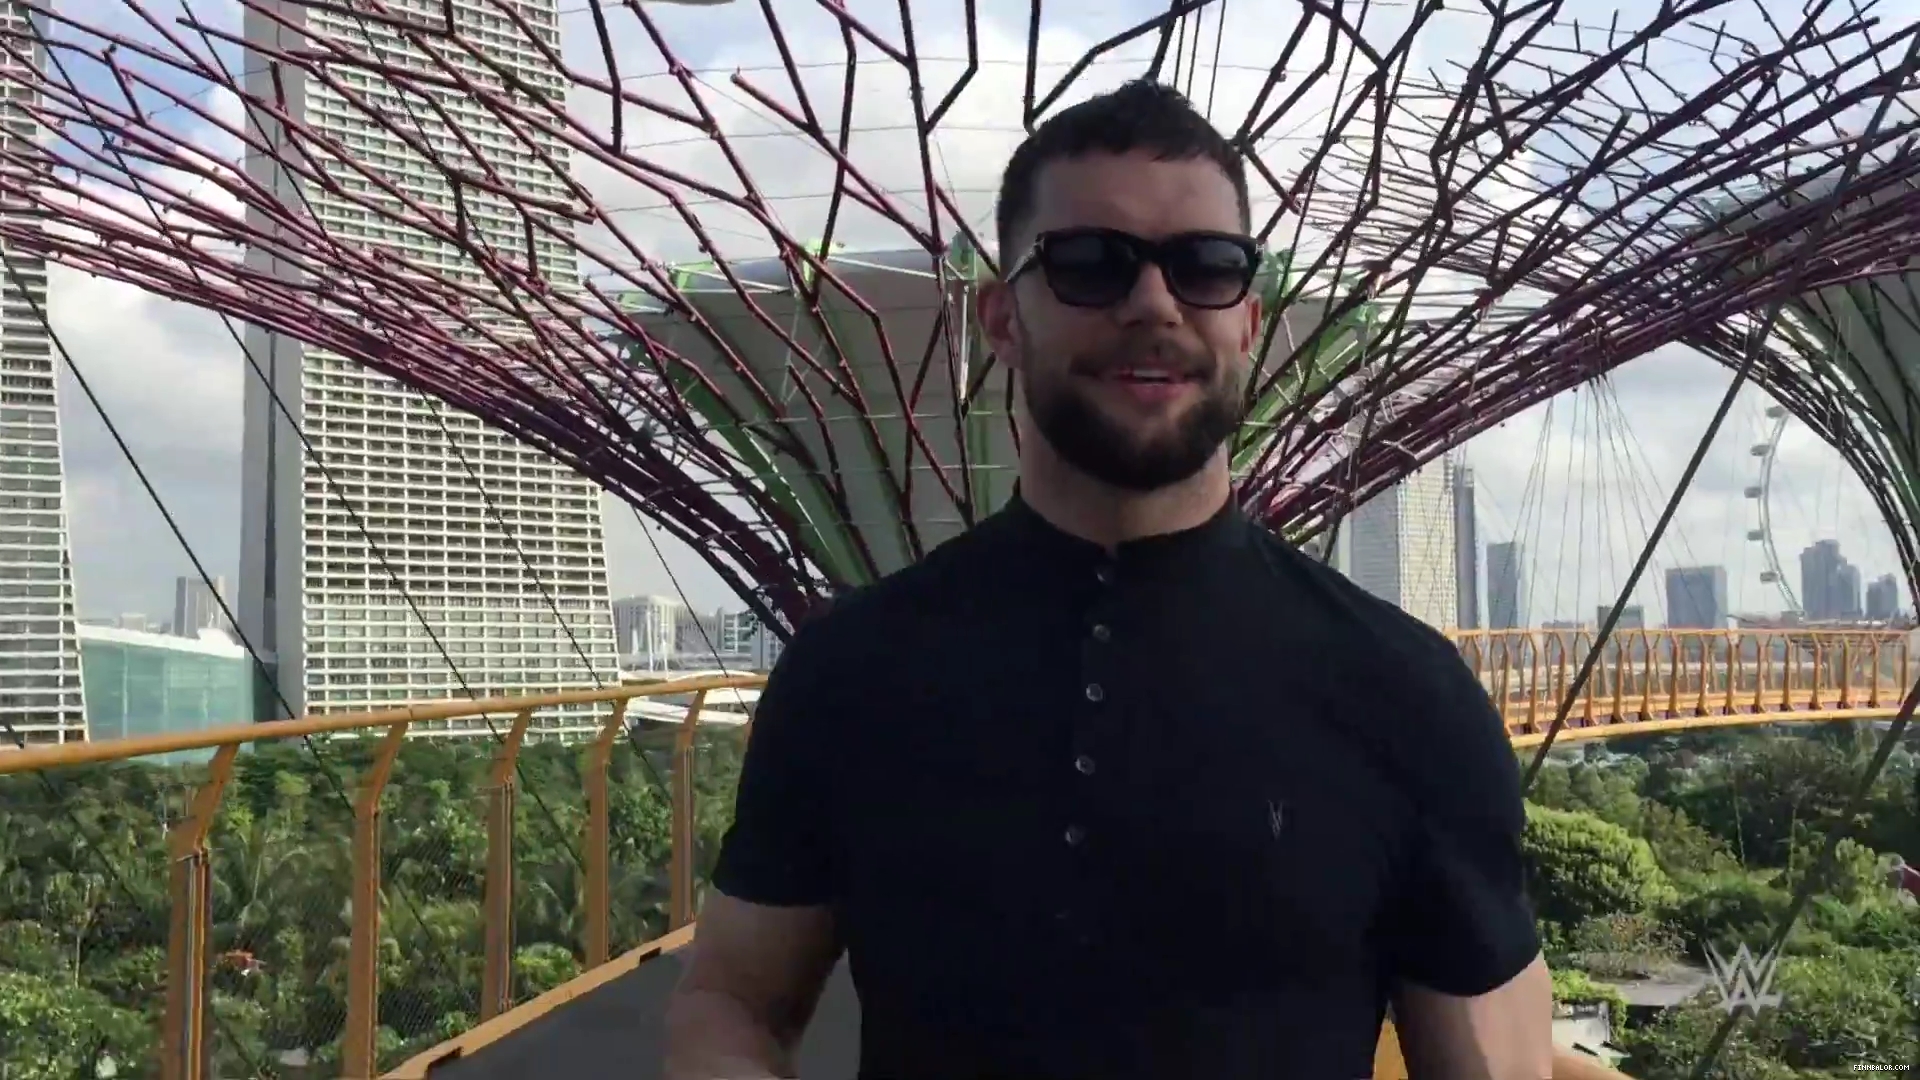 Finn_Balor_feels_like_he_is_in__Star_Wars__while_touring_Singapore_s_Supertree__mp40022.jpg